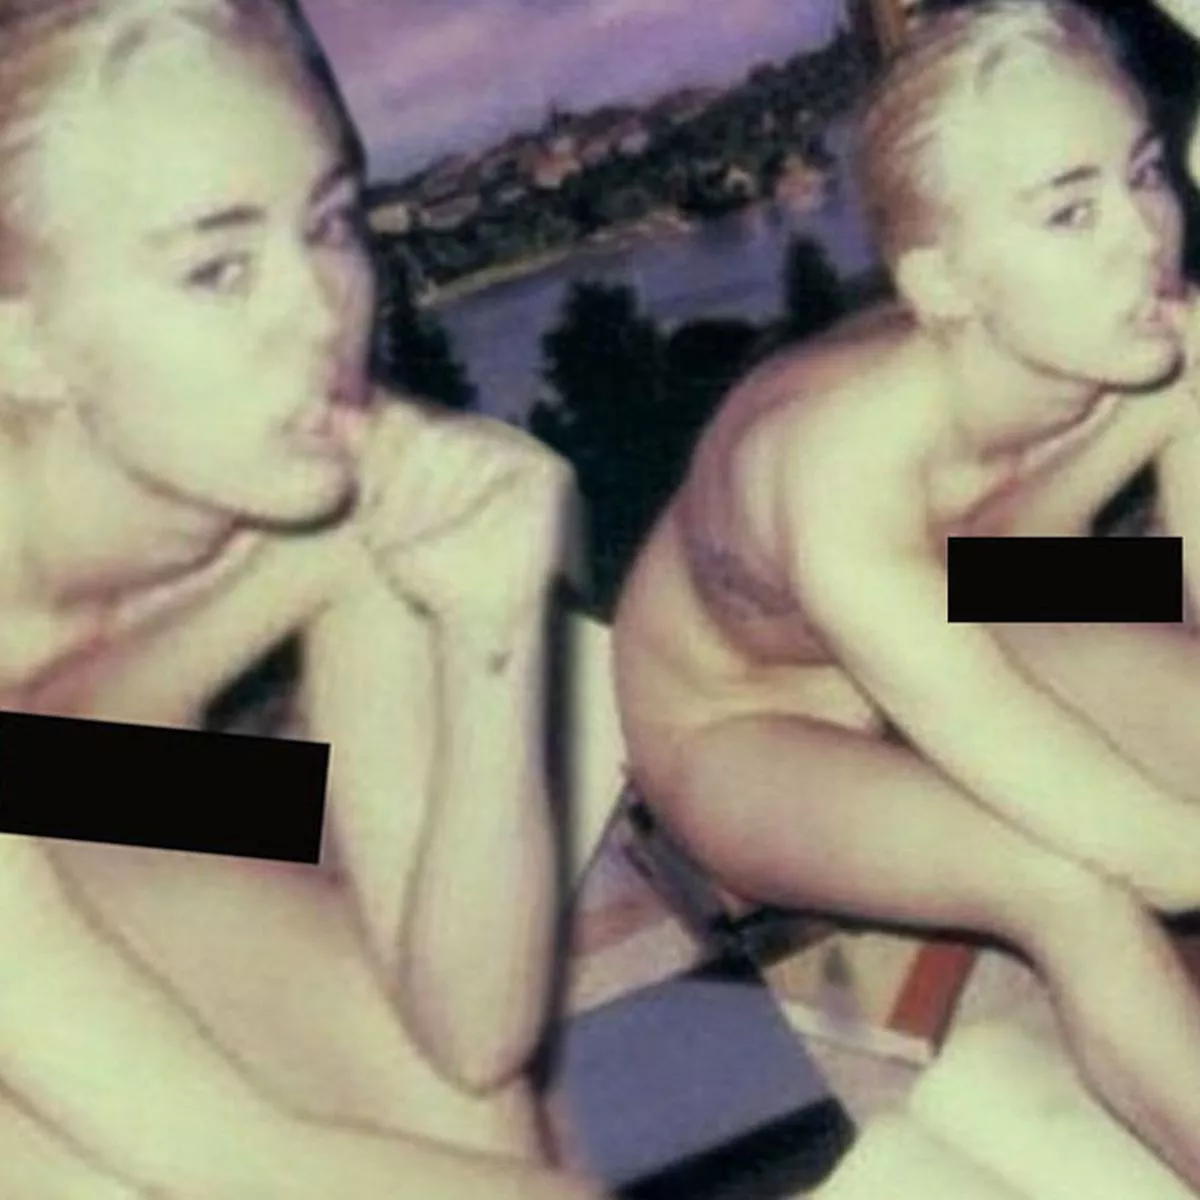 campbell foster share miley cyrus leaked sex photos